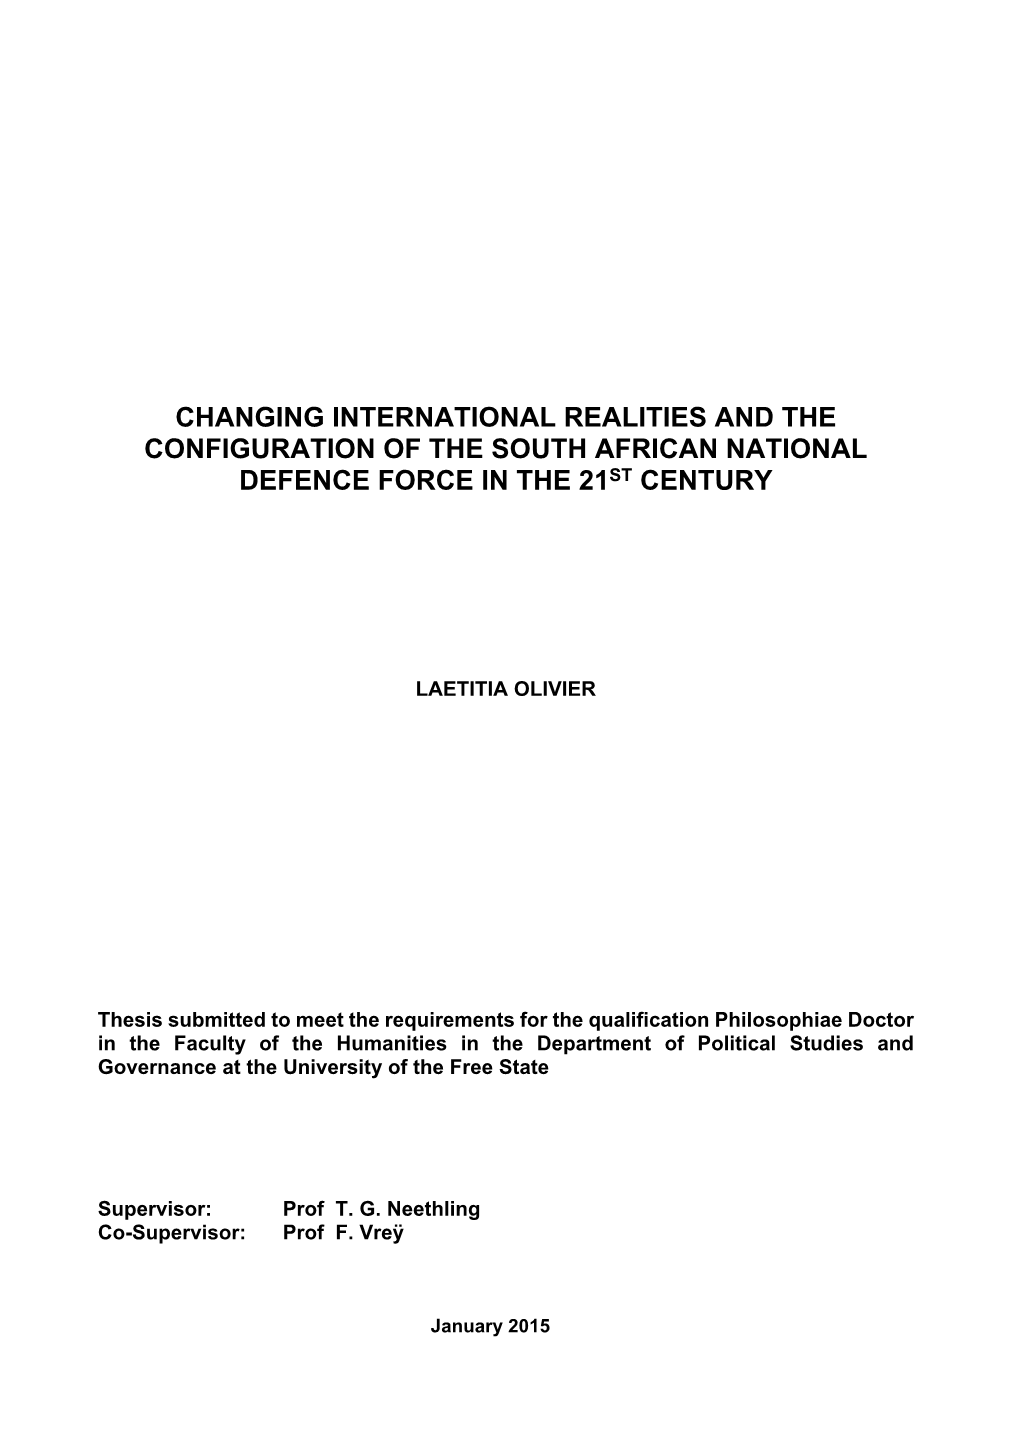 Changing International Realities and the Configuration of the South African National Defence Force in the 21St Century